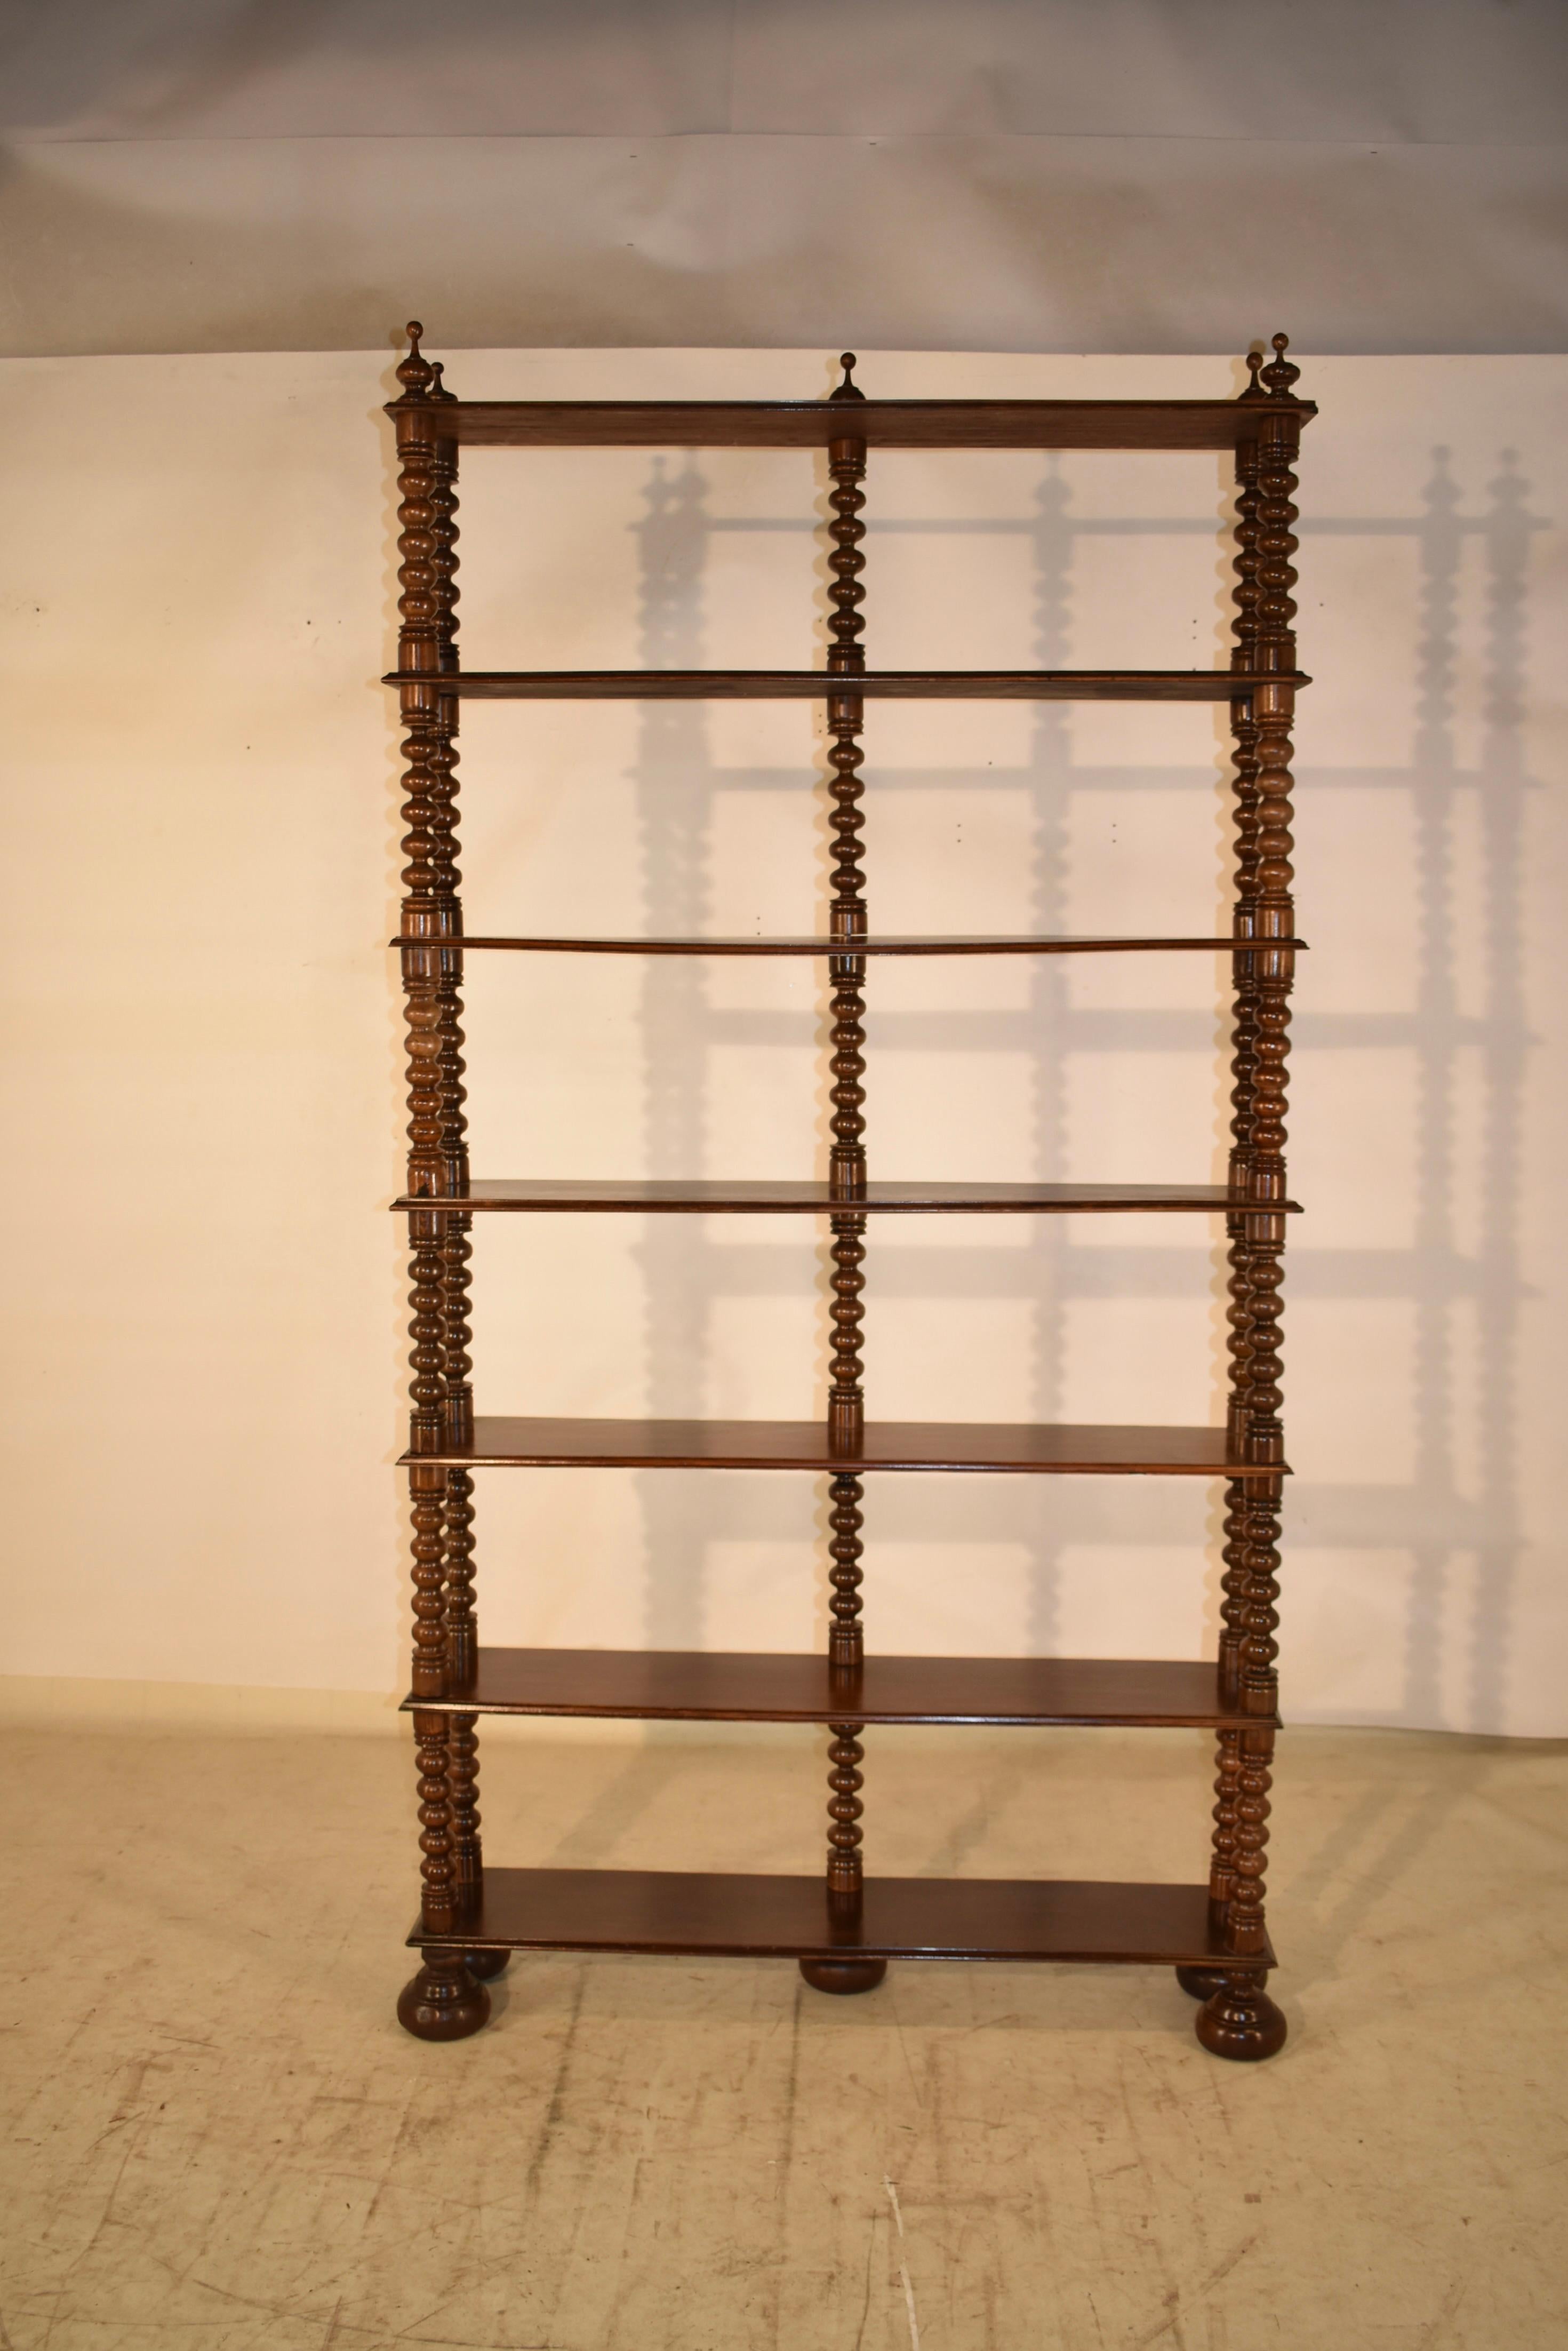 19th Century tall standing shelf from France, made from walnut. It has wonderfully hand turned finials at the top of the piece, over six shelves, all separated by hand turned shelf supports in a bobbin pattern. The piece is supported on lovely hand